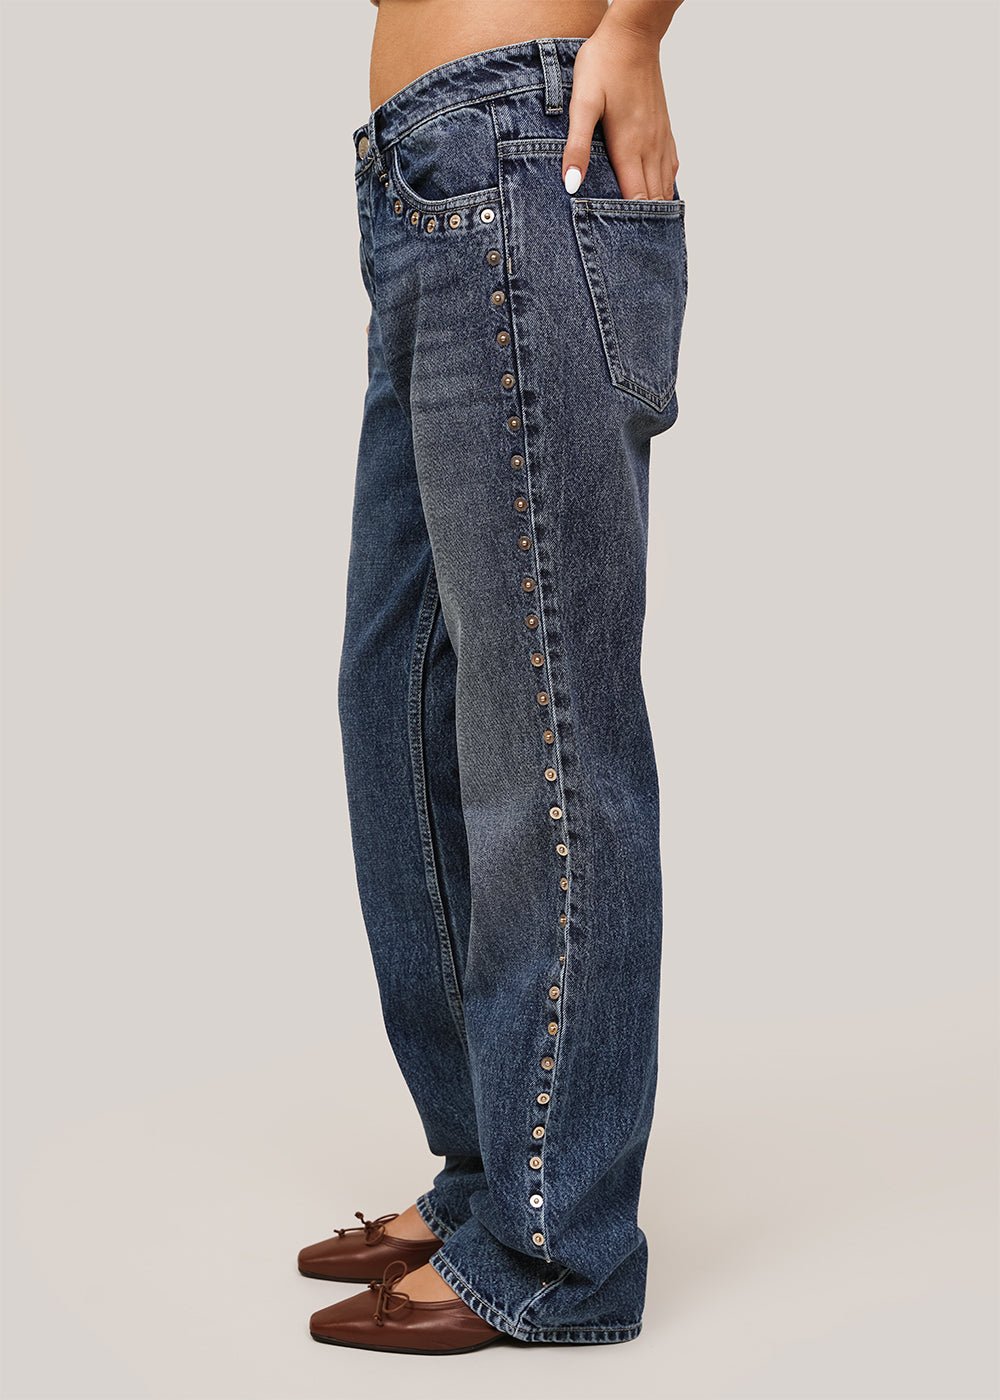 Paloma Wool Denim Crowd Jeans - New Classics Studios Sustainable Ethical Fashion Canada